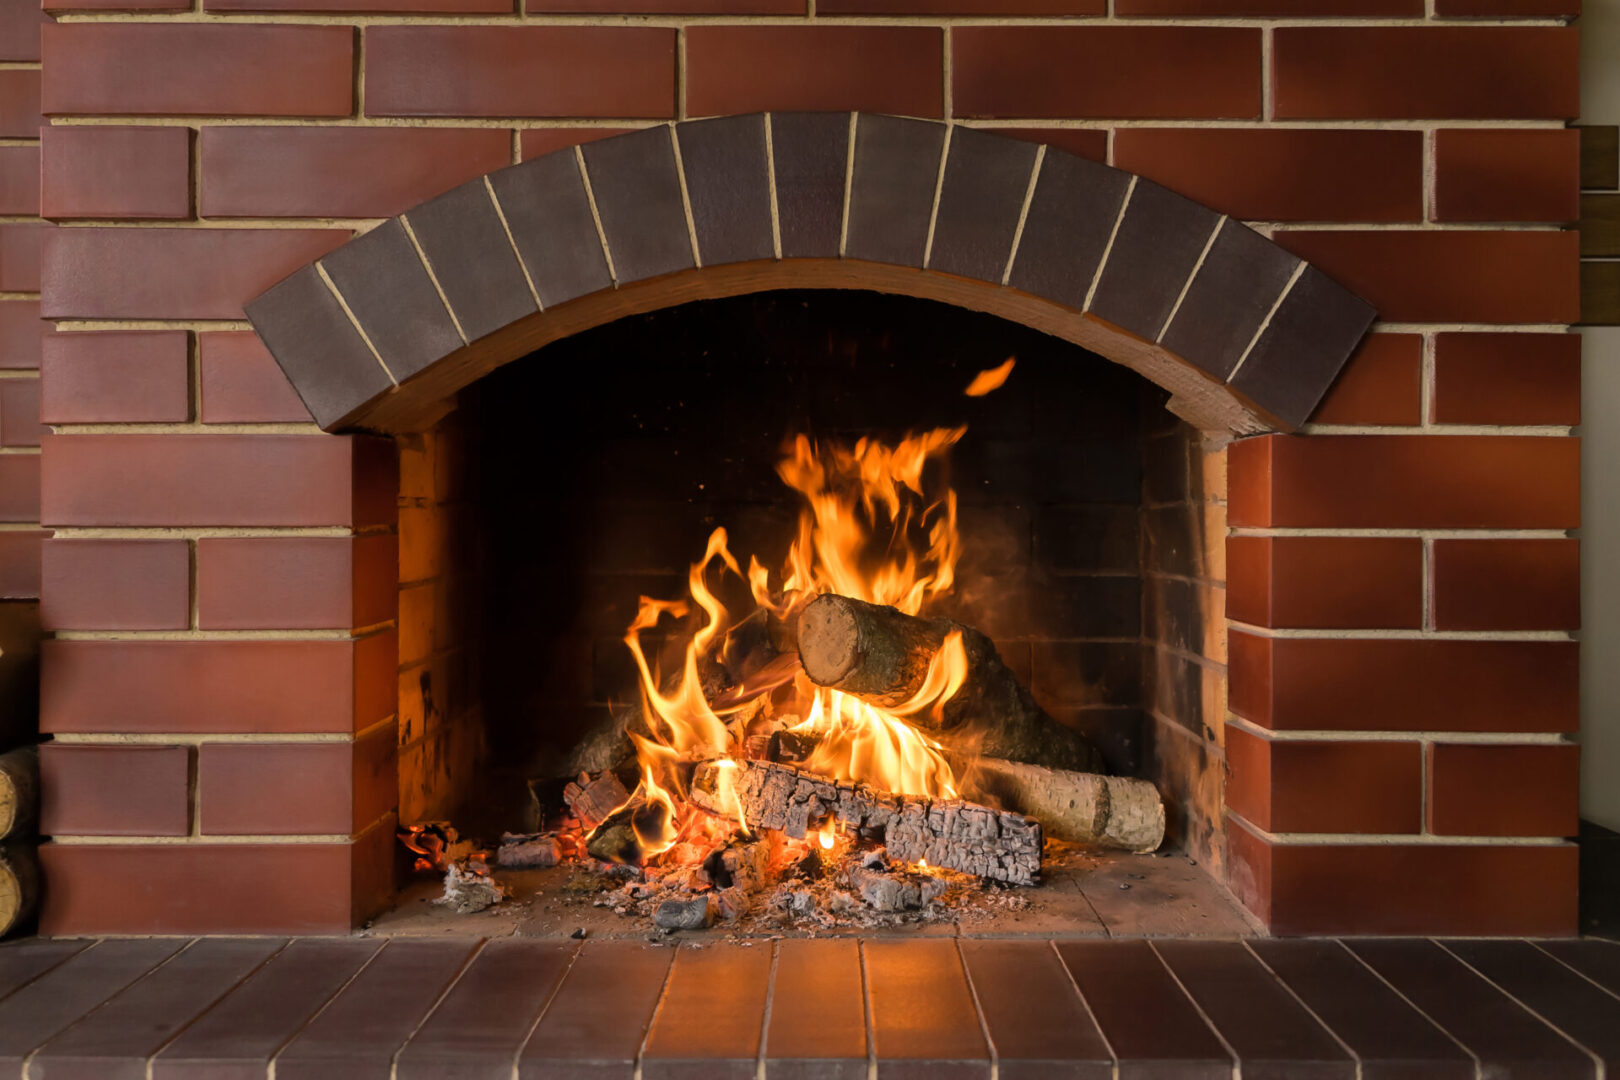 A brick fireplace with fire burning in it.